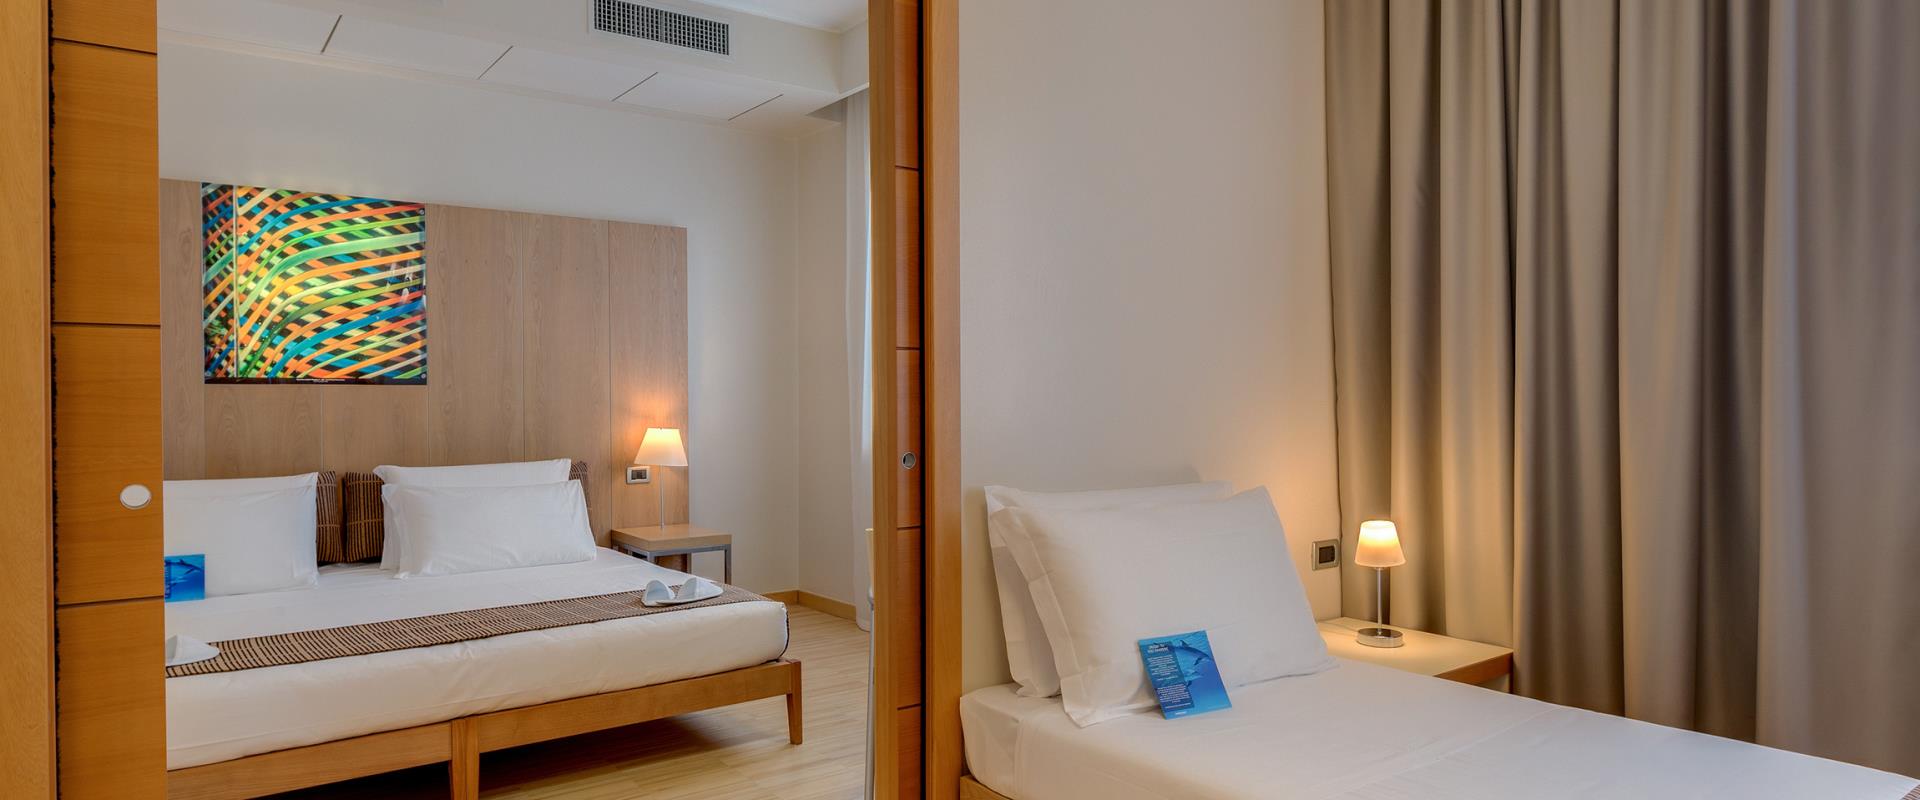 If you are travelling with your family or in a group, choose our spacious Family rooms and visit Venice in an easy way with BW Plus 4 star Hotel Bologna.